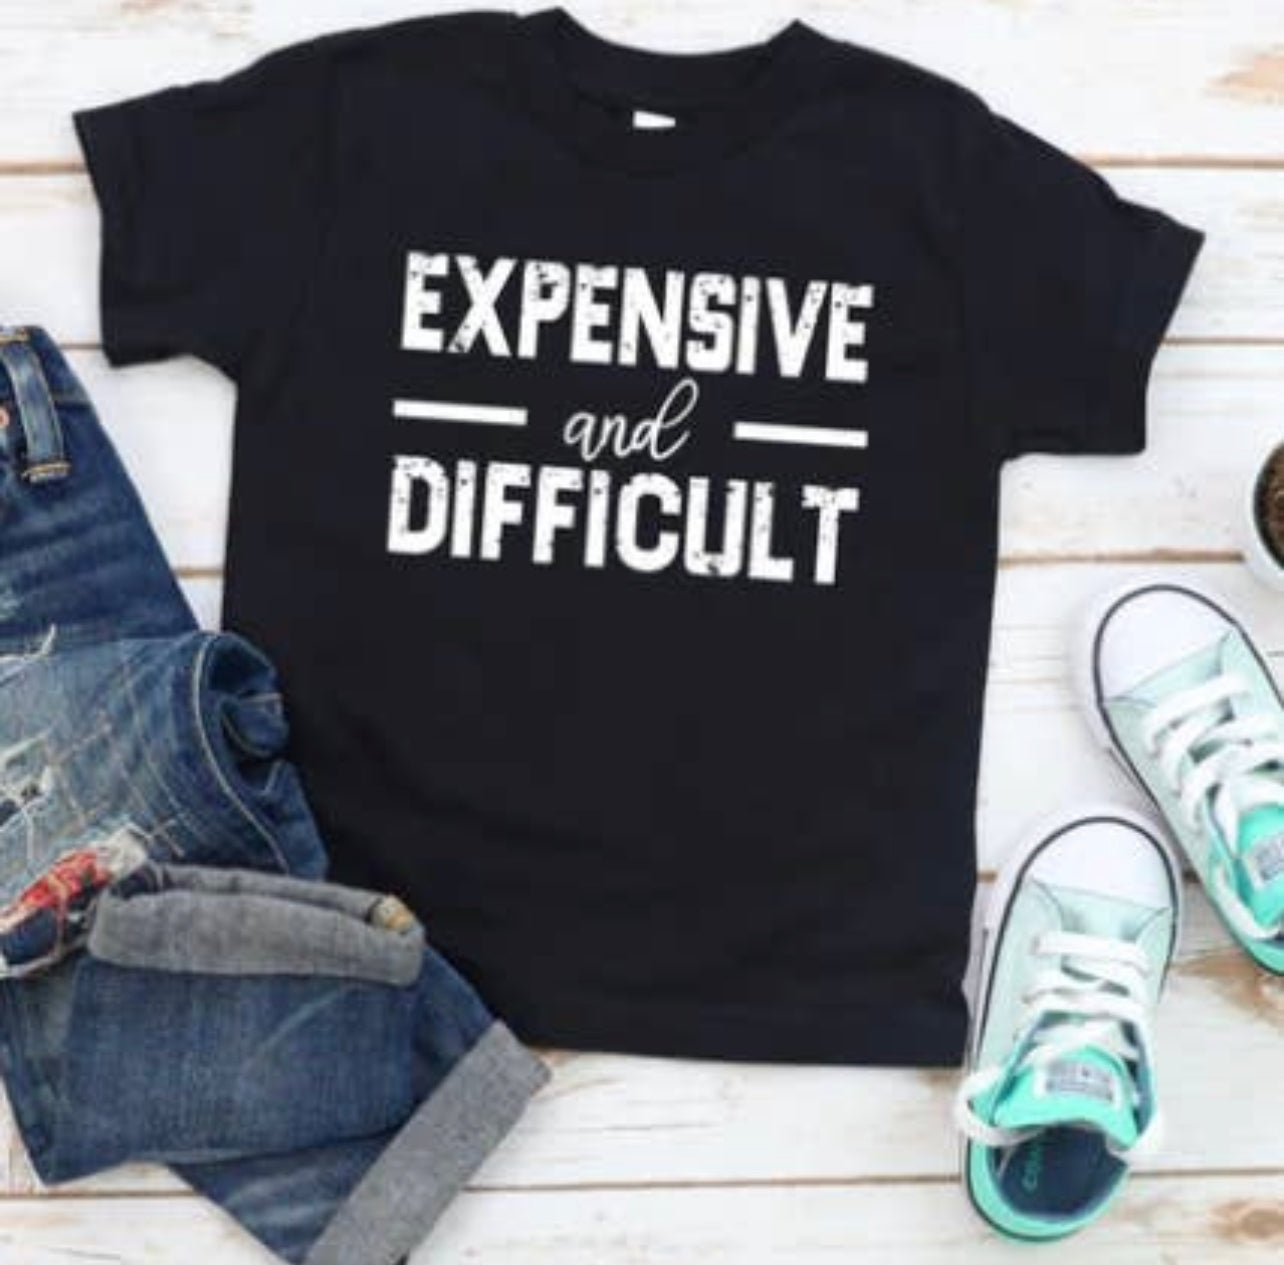 Expensive & Difficult kids tee